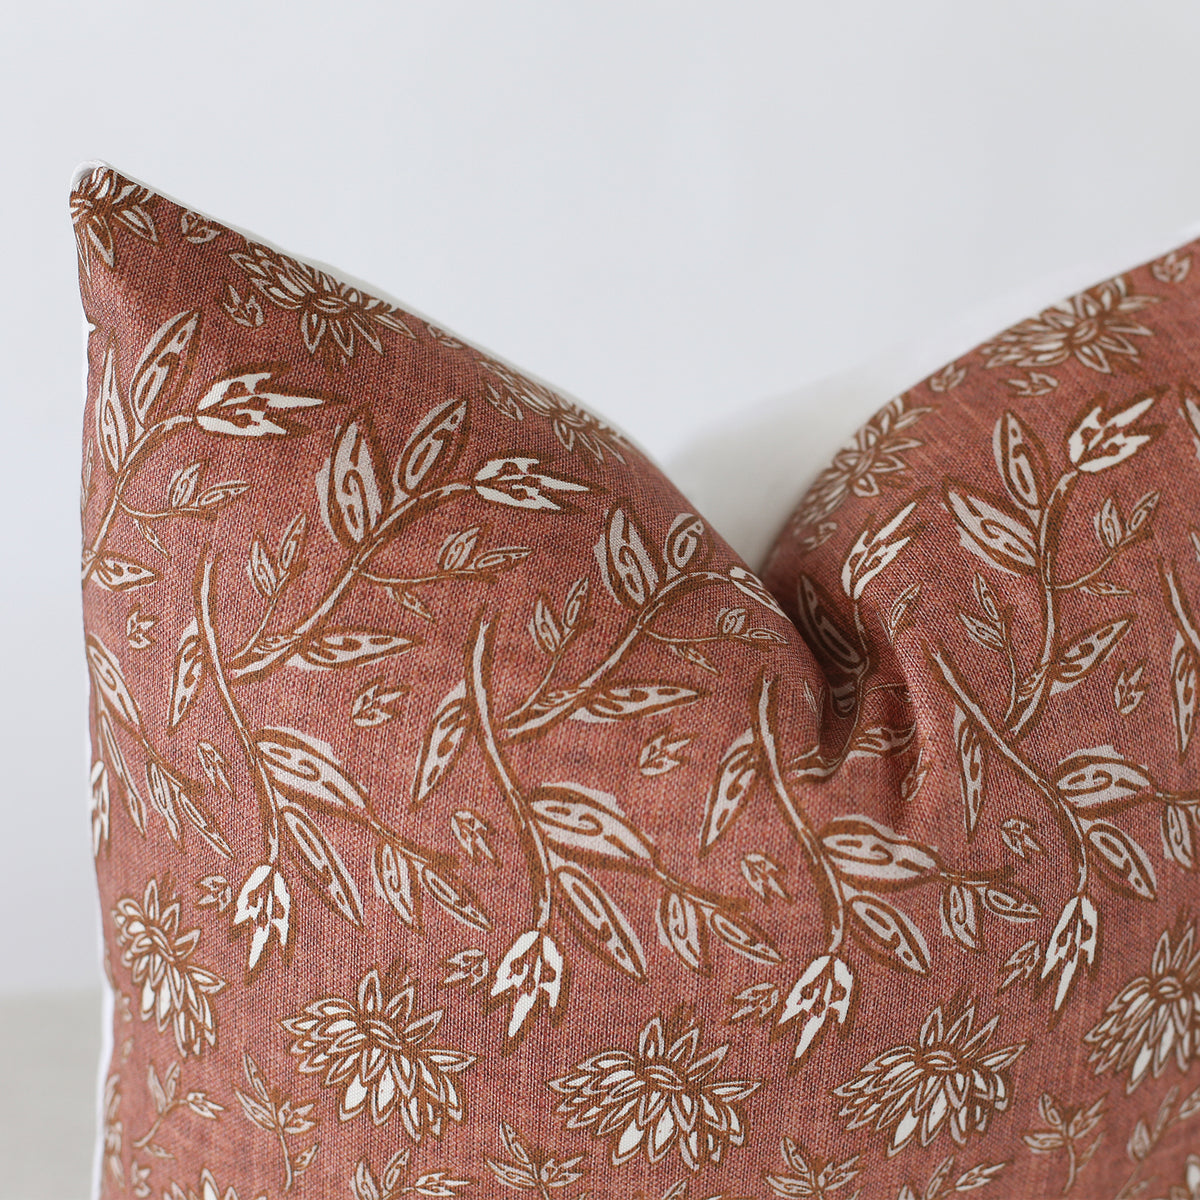 Terracotta Floral Pillow Cover